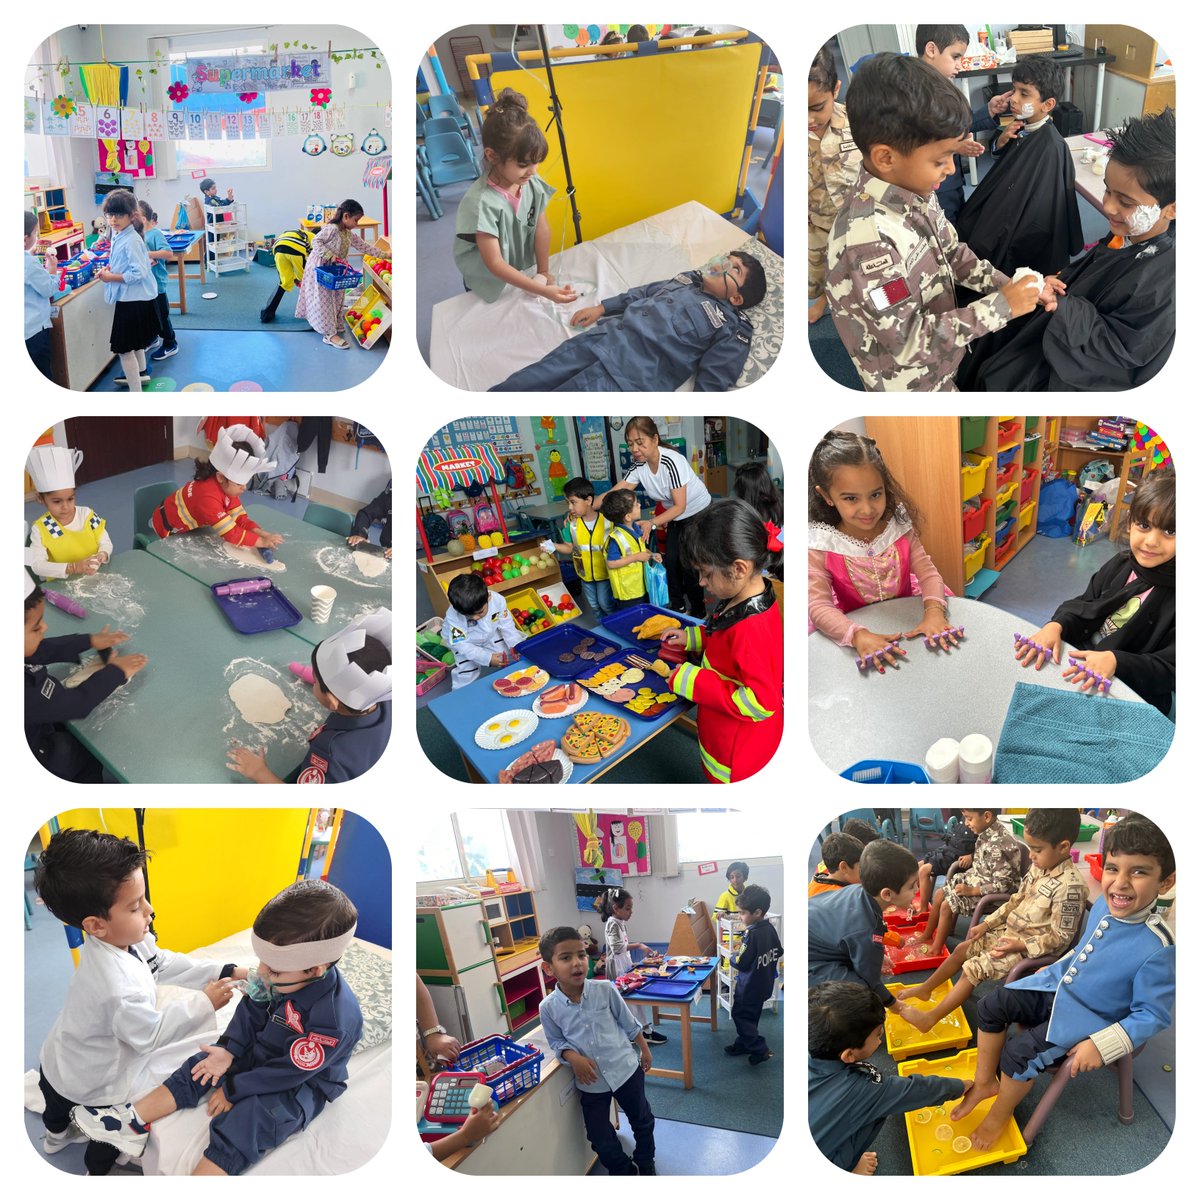 Last Thursday we had an incredible day roleplaying different community helpers. We also welcomed some parents who came to speak about the job that they do.
#CareerDay #Dressup #Costumes #WhenIGrowUp #CommunityHelpers #WeLoveSchool #KidnAroundKG #EYFS #Qatar #LearningThroughPlay